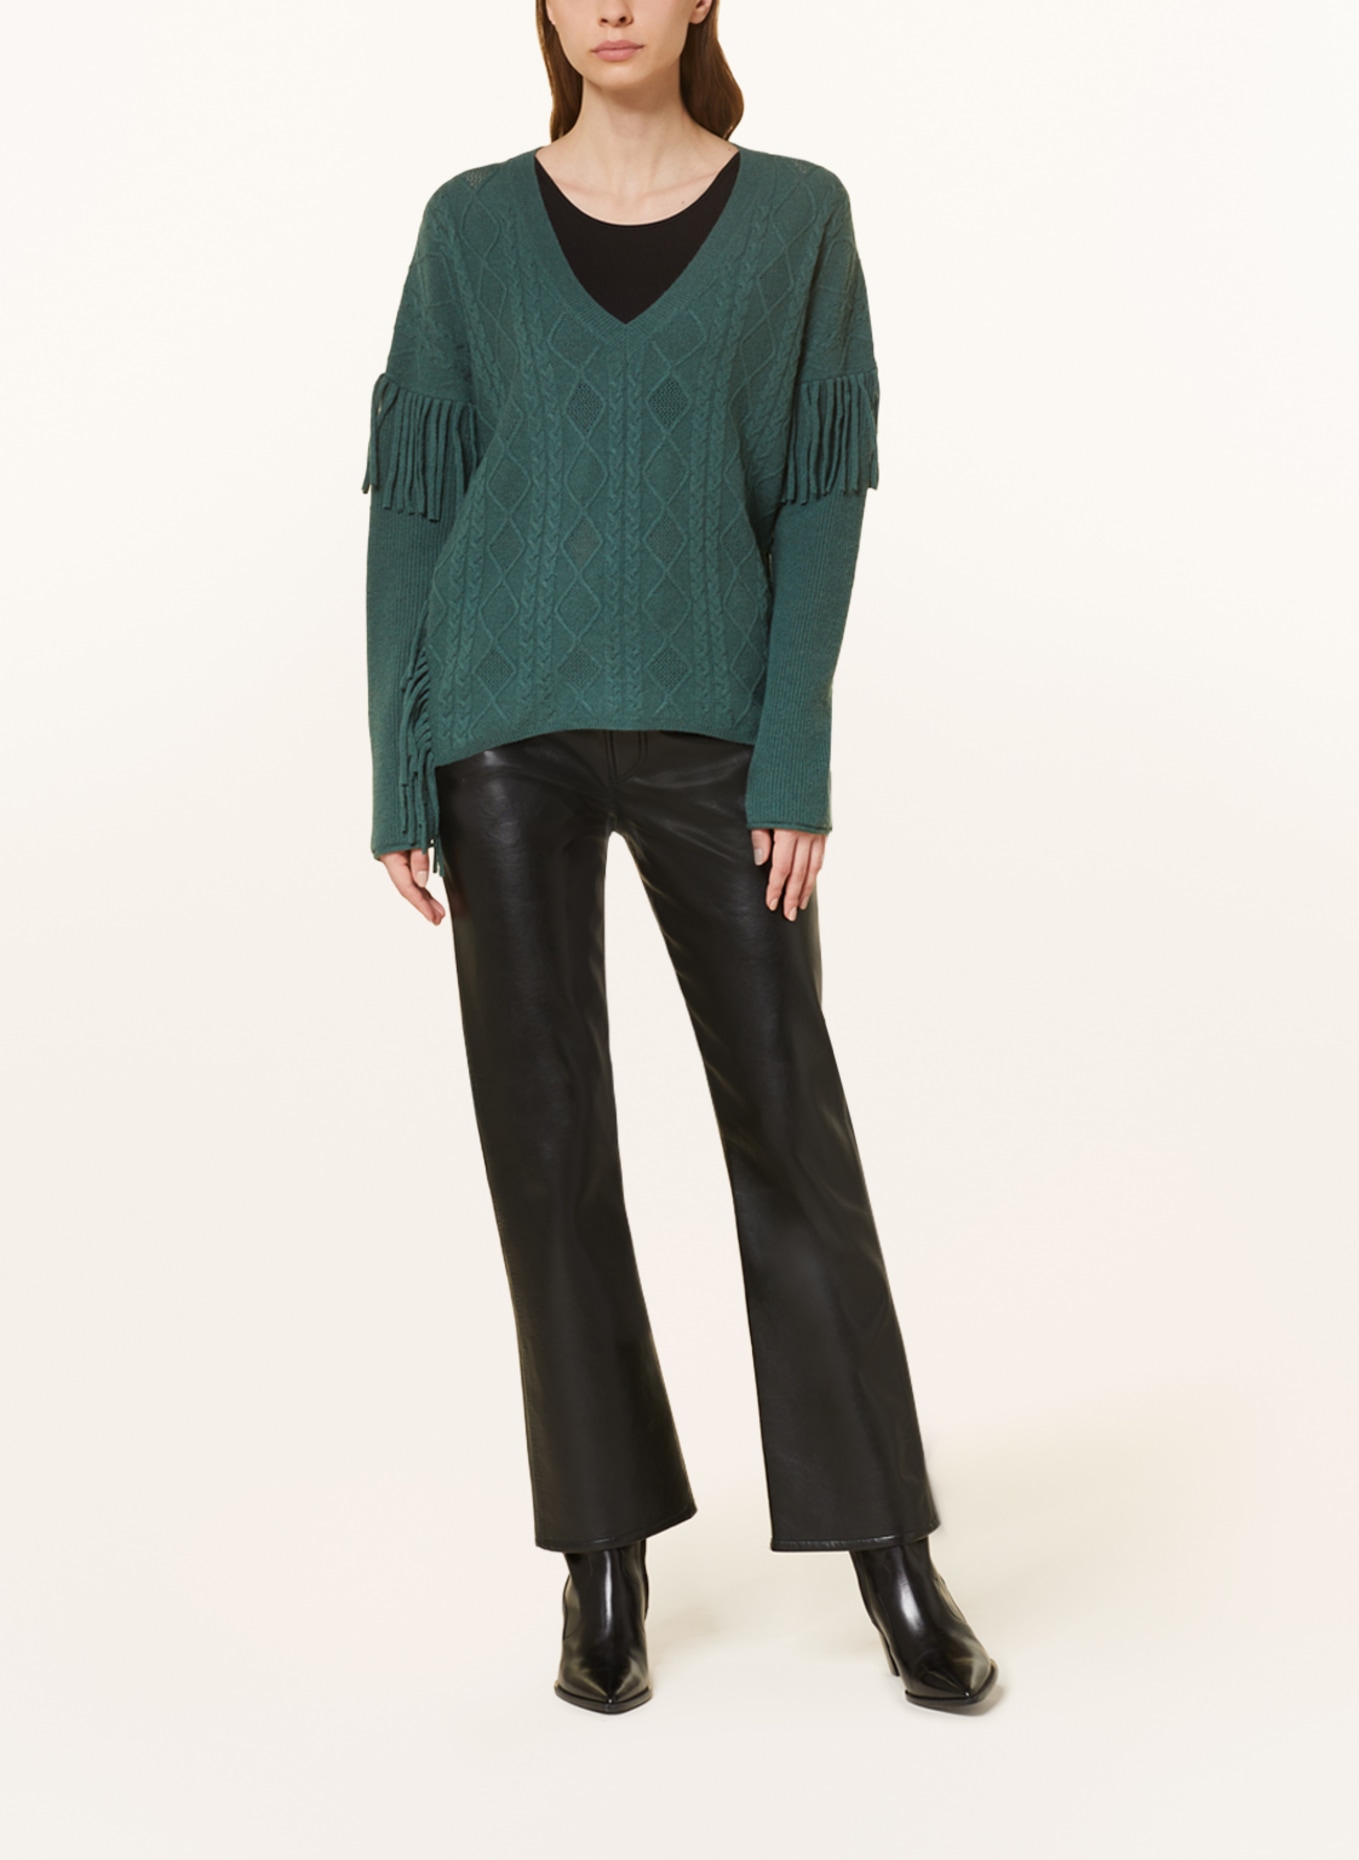 Princess GOES HOLLYWOOD Oversized sweater, Color: DARK GREEN (Image 2)